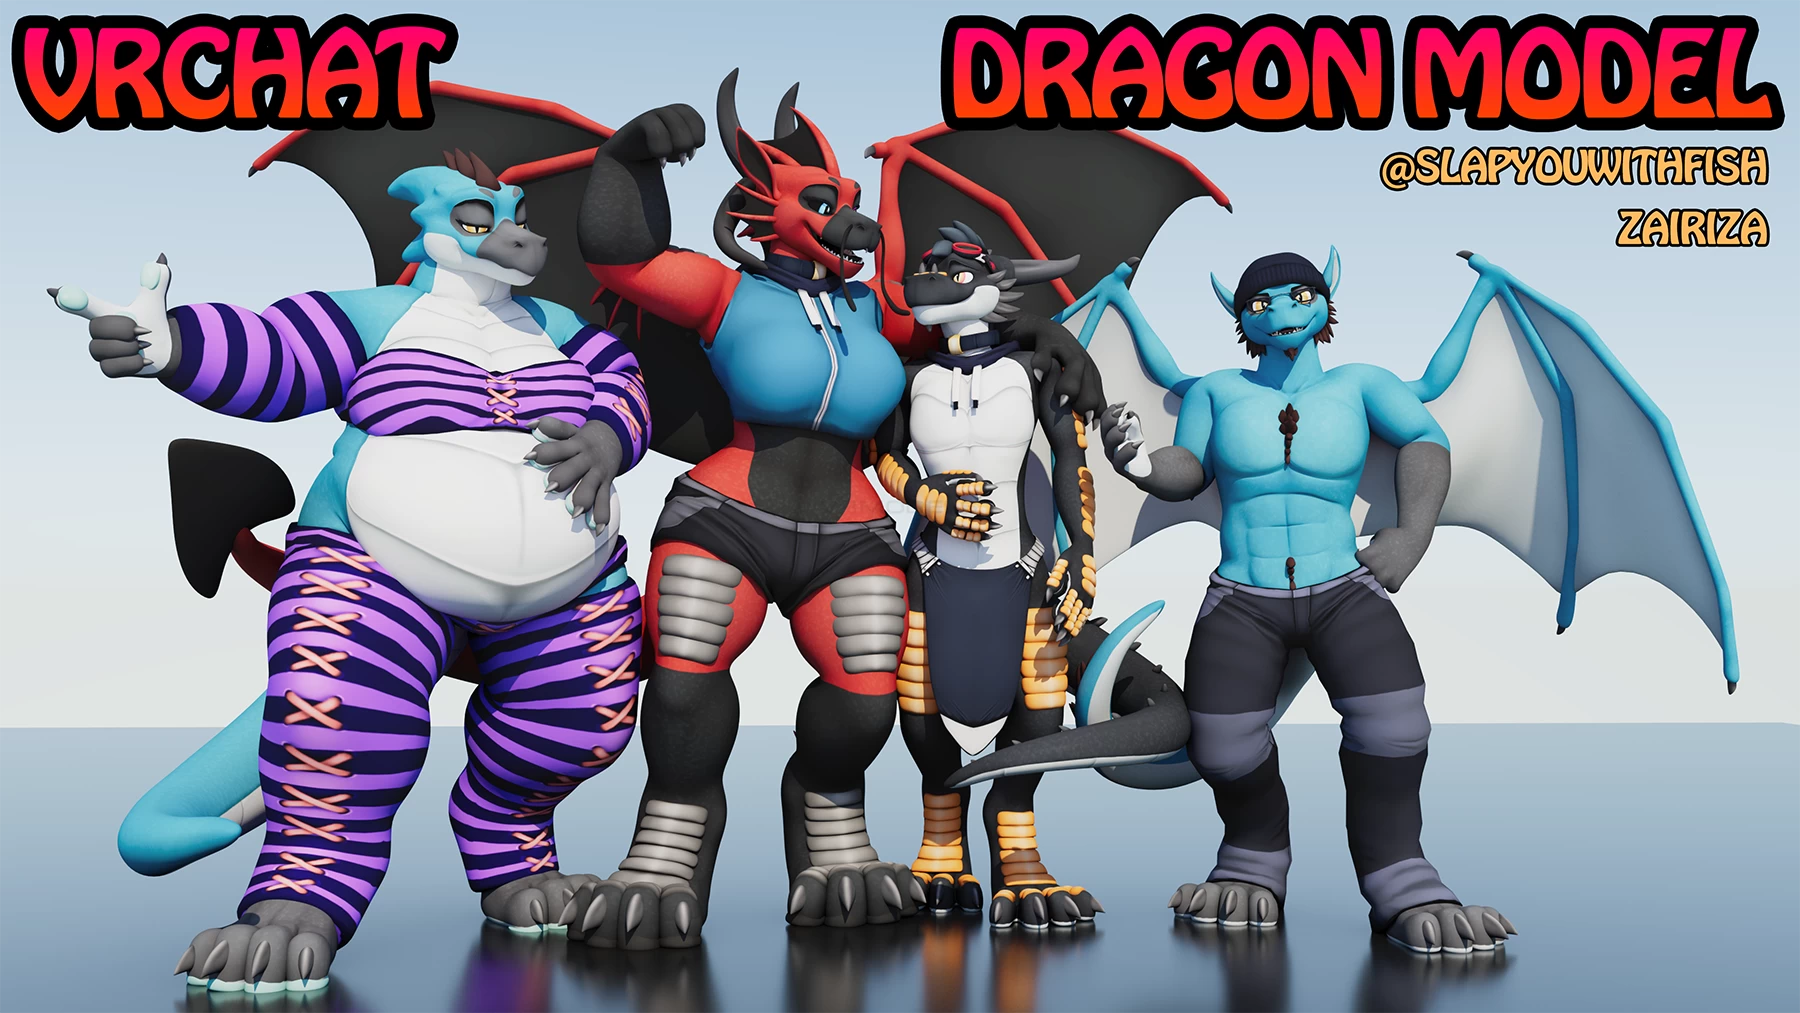 Dragon VRChat Model VRModels 3D Models For VR AR And CG Projects